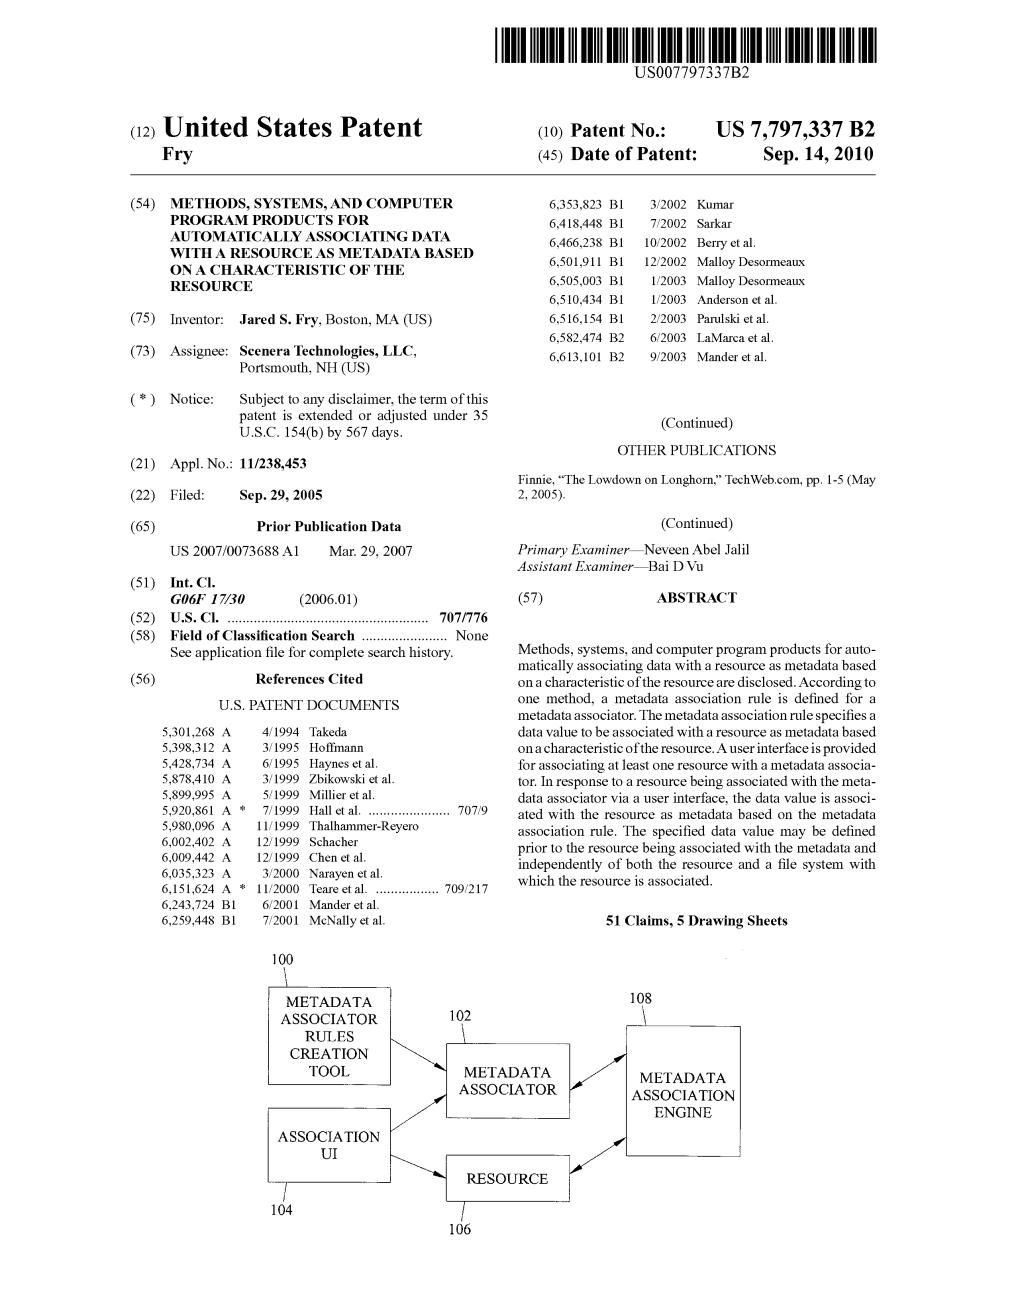 (12) United States Patent (10) Patent No.: US 7,797,337 B2 Fry (45) Date of Patent: Sep